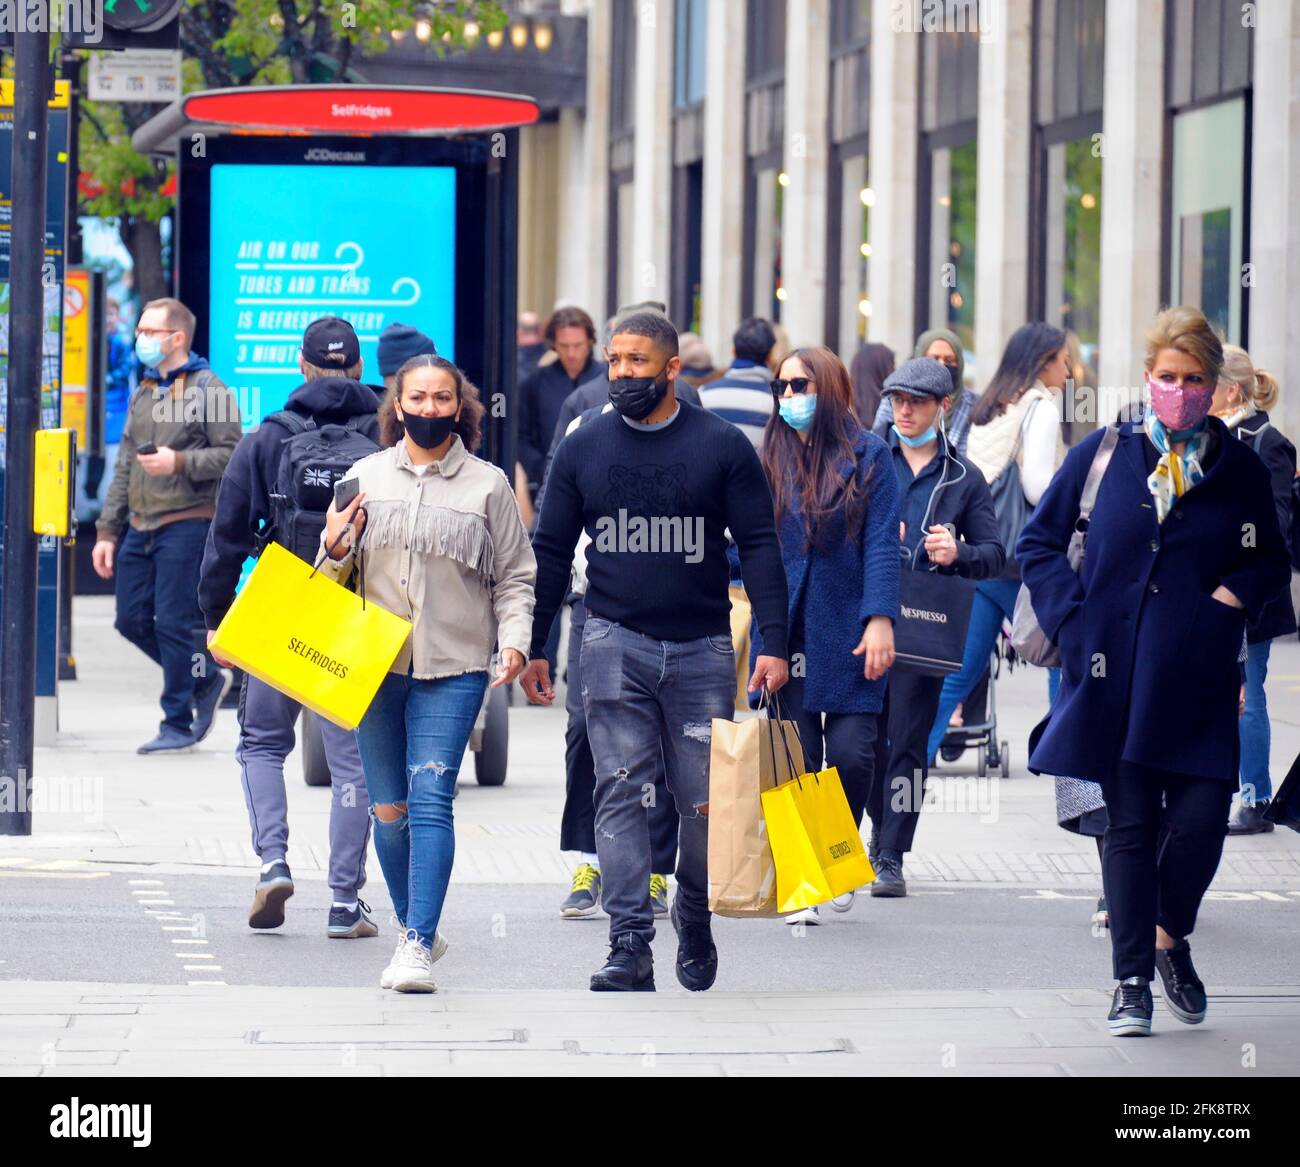 London, UK, 29 April 2021 Oxford street busy with shoppers after coronavirus restrictions lifted. Credit: JOHNNY ARMSTEAD/Alamy Live News Stock Photo